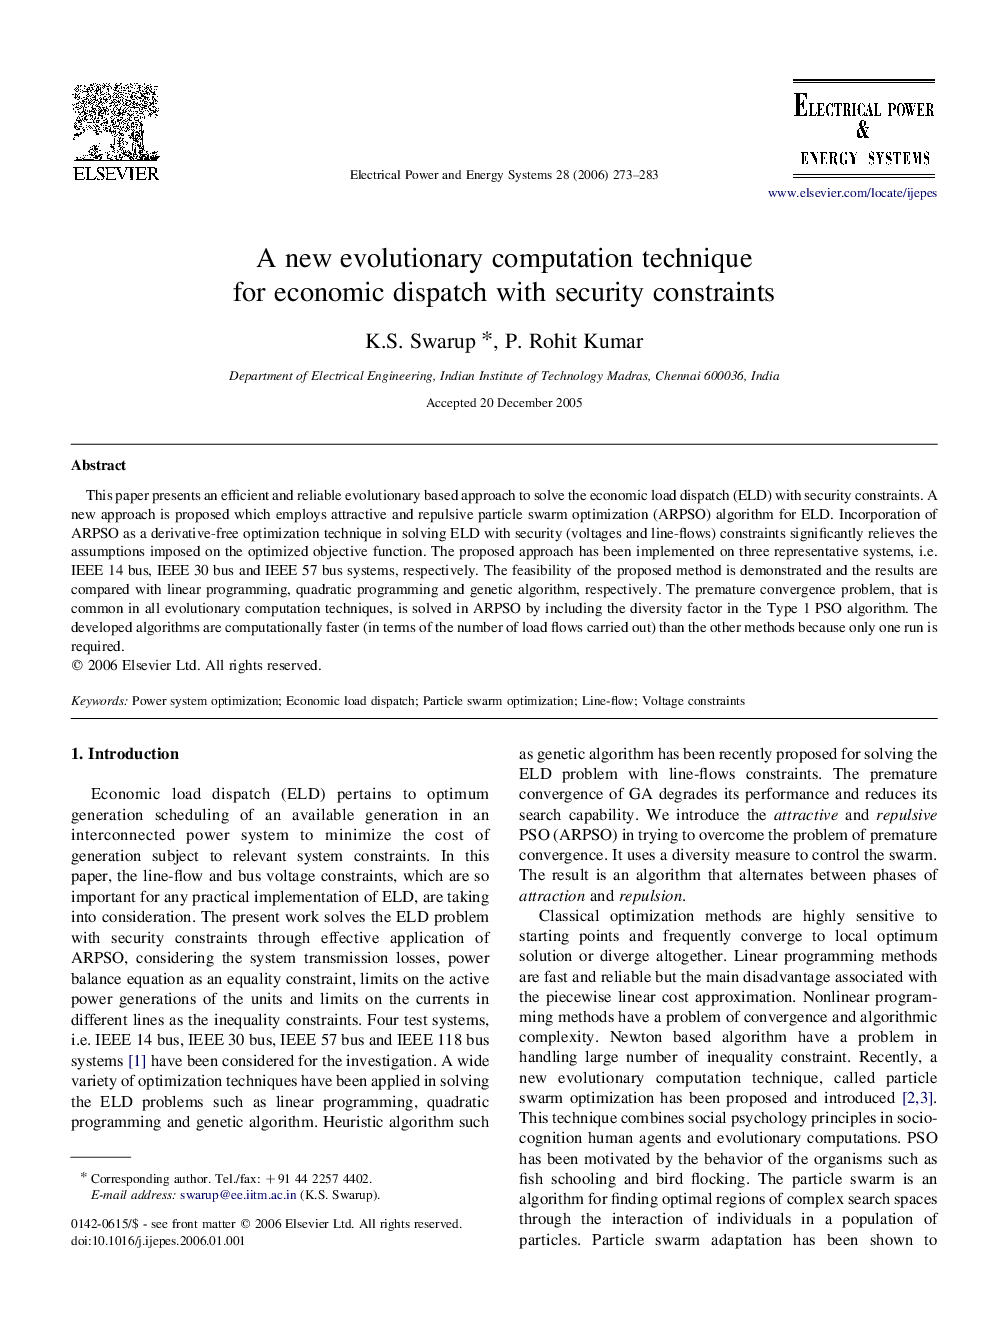 A new evolutionary computation technique for economic dispatch with security constraints